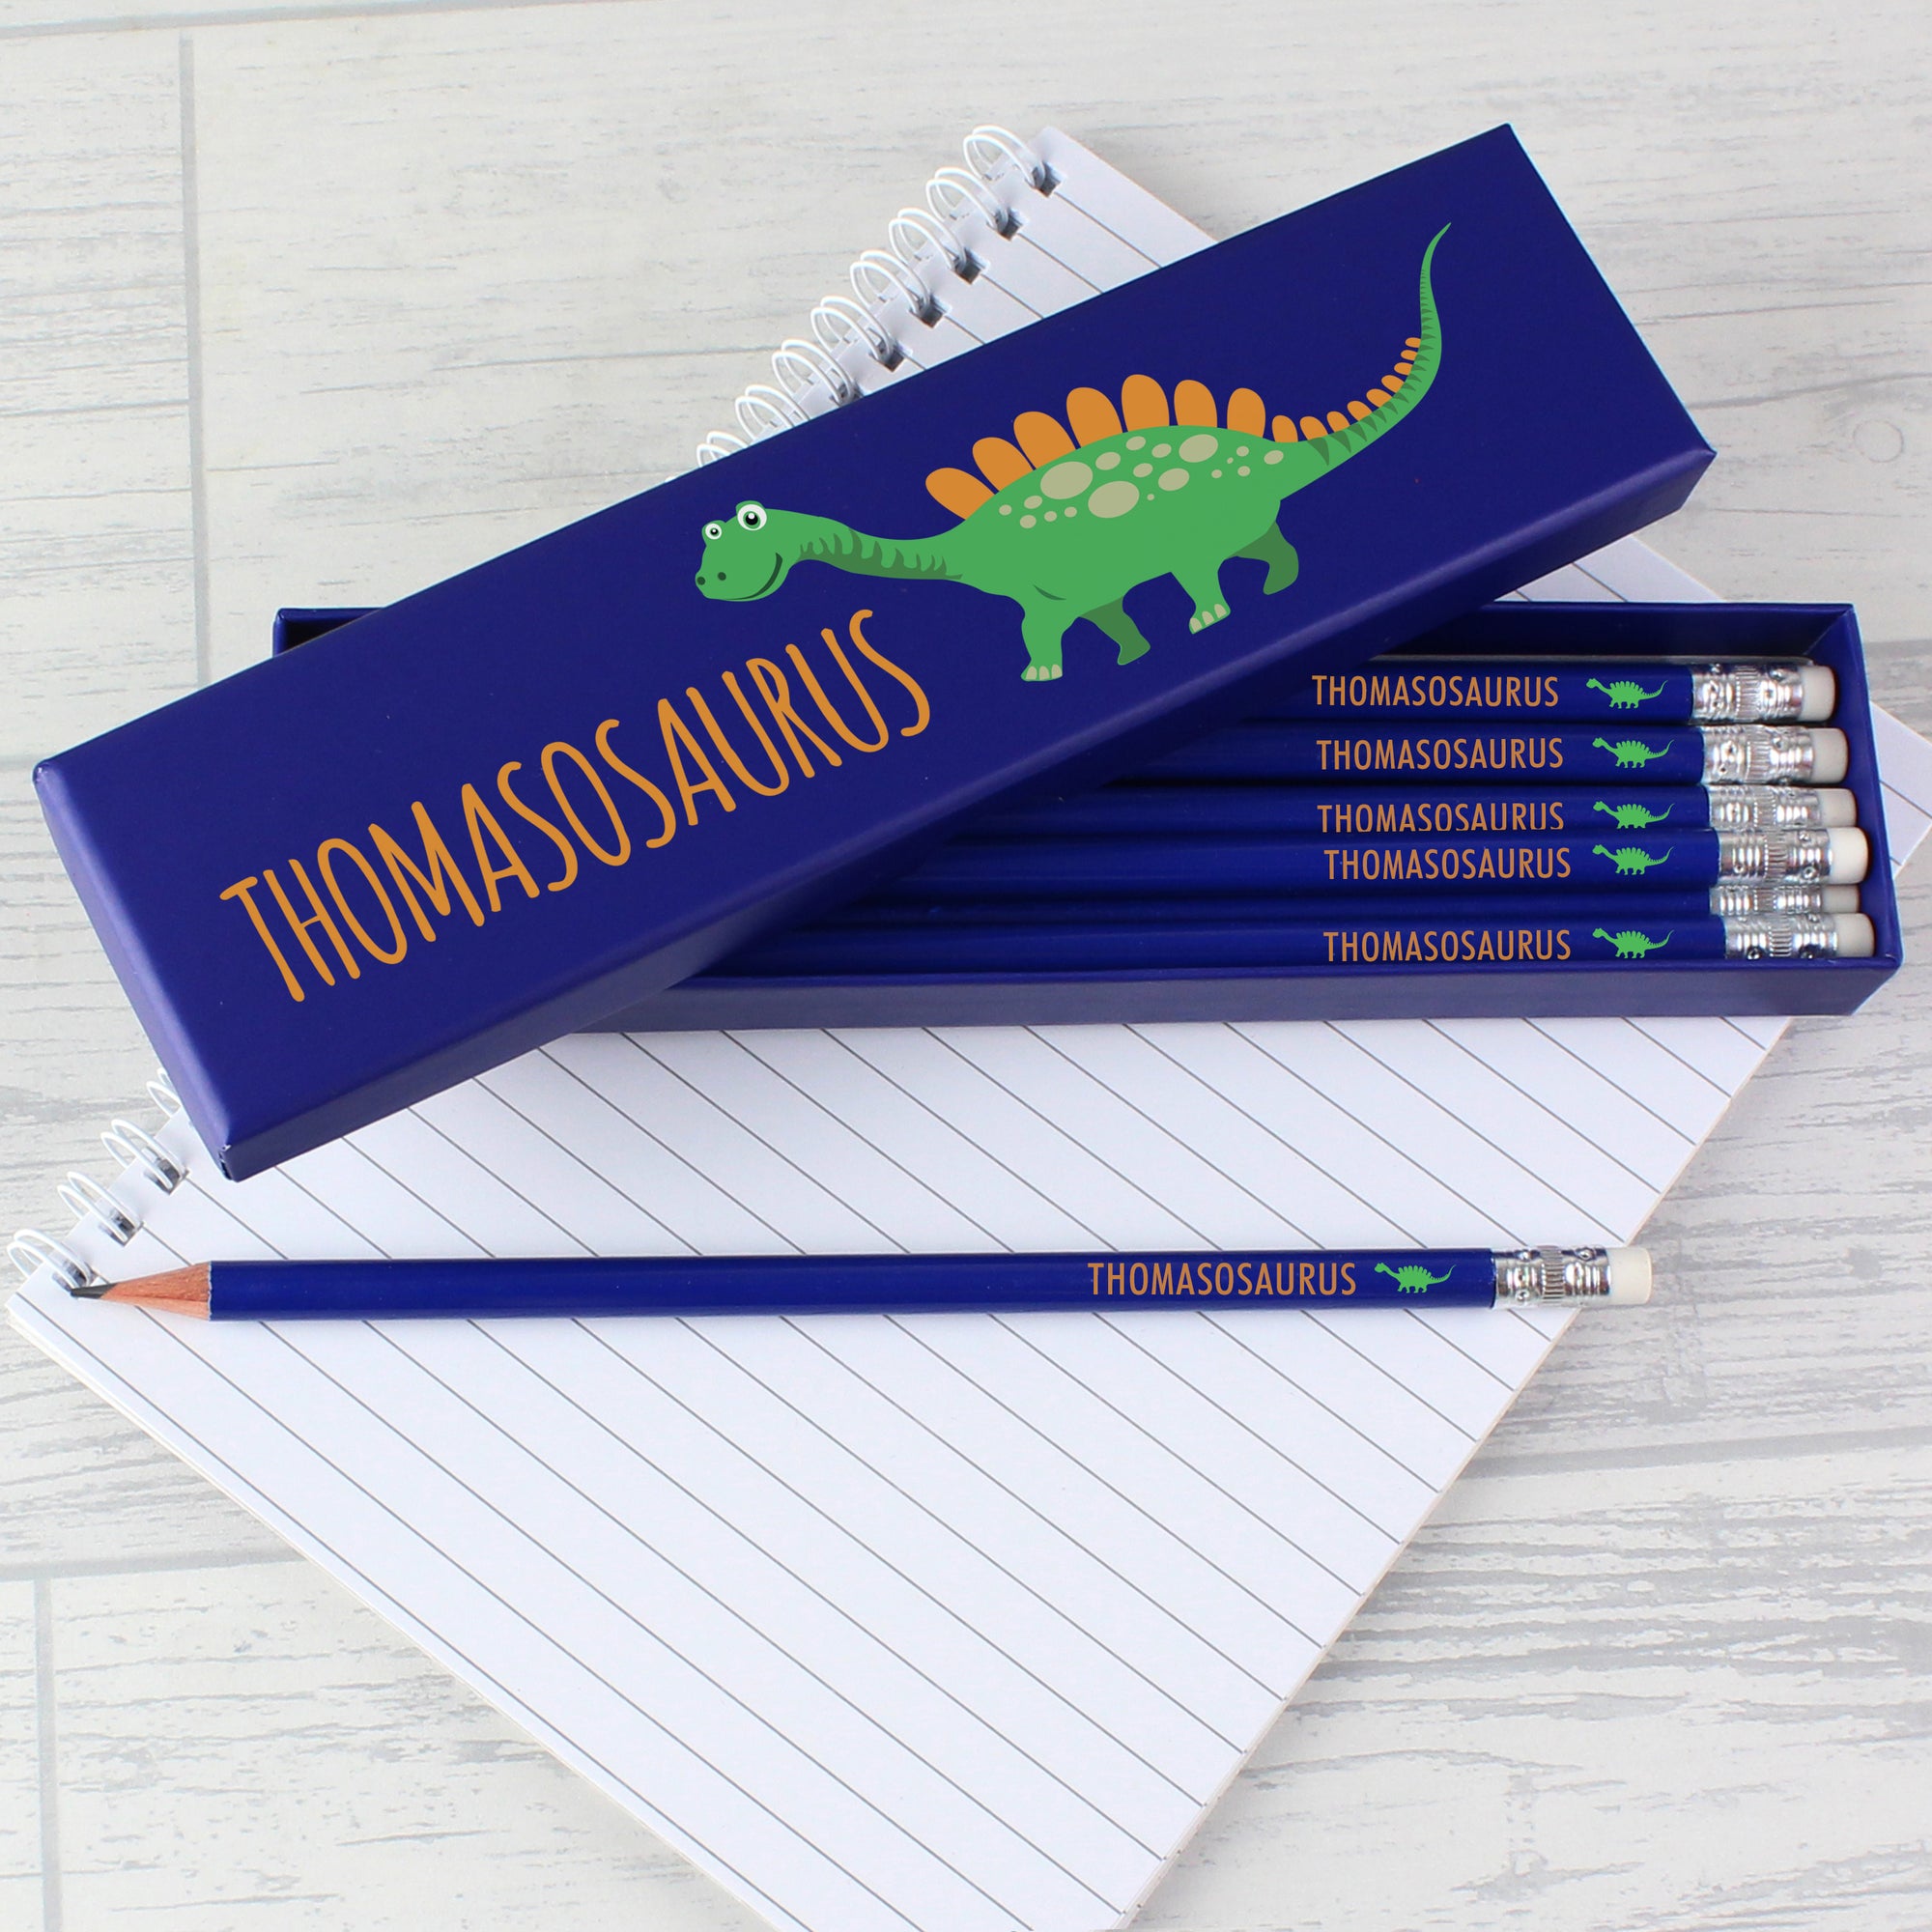 Image of a blue box with a friendly dinosaur image on the front and a name of your choice which will be printed in orange uppercase letters. Inside the box there are 12 blue HB writing pencils, each with a rubber on the end which can also be personalised with a name of your choice and printed in orange uppercase letters which will be followed by a mini dinosaur image.